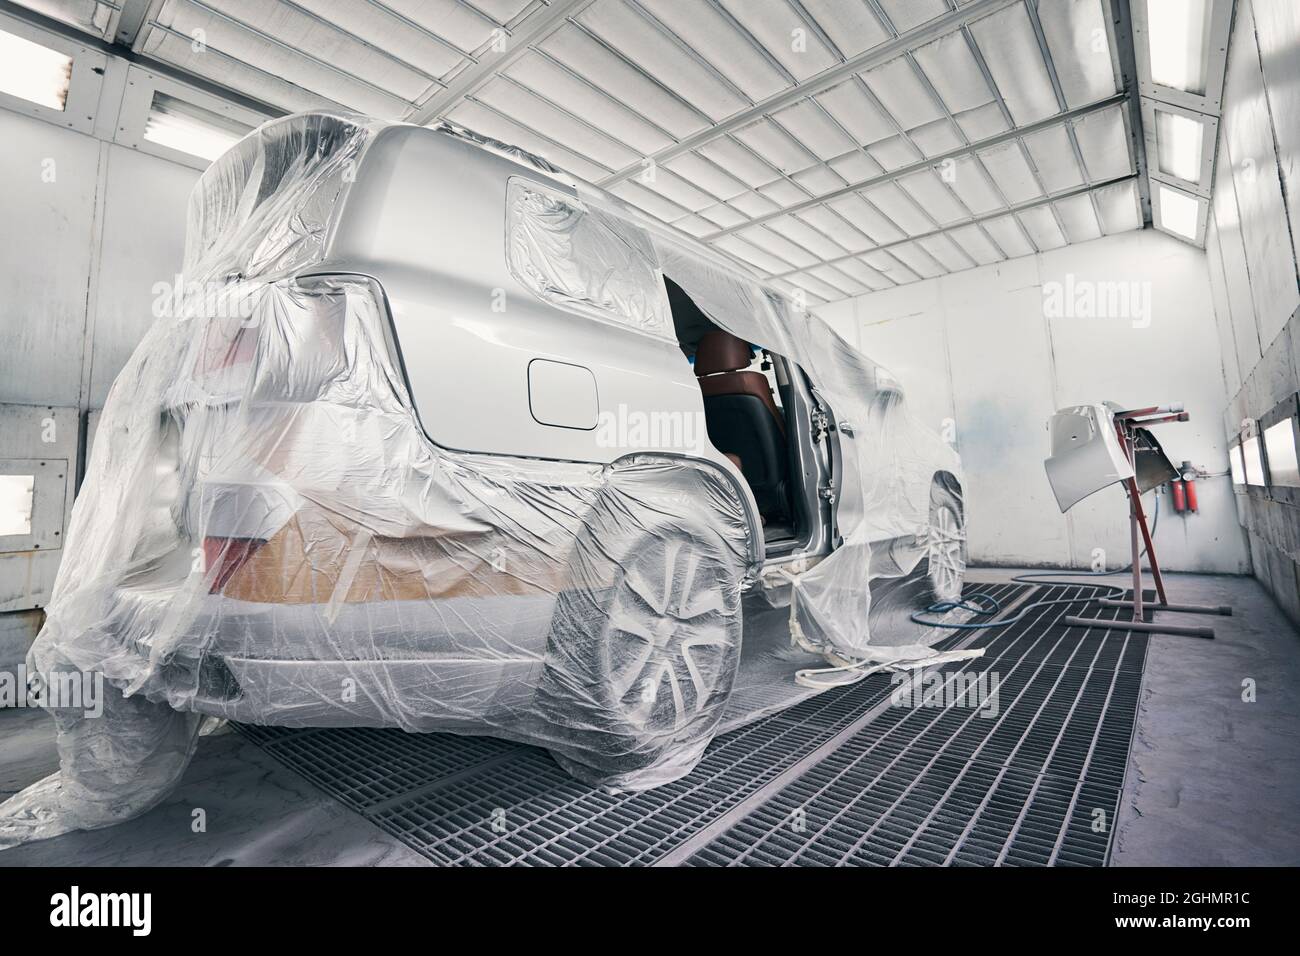 Car in a coating room ready for painting Stock Photo